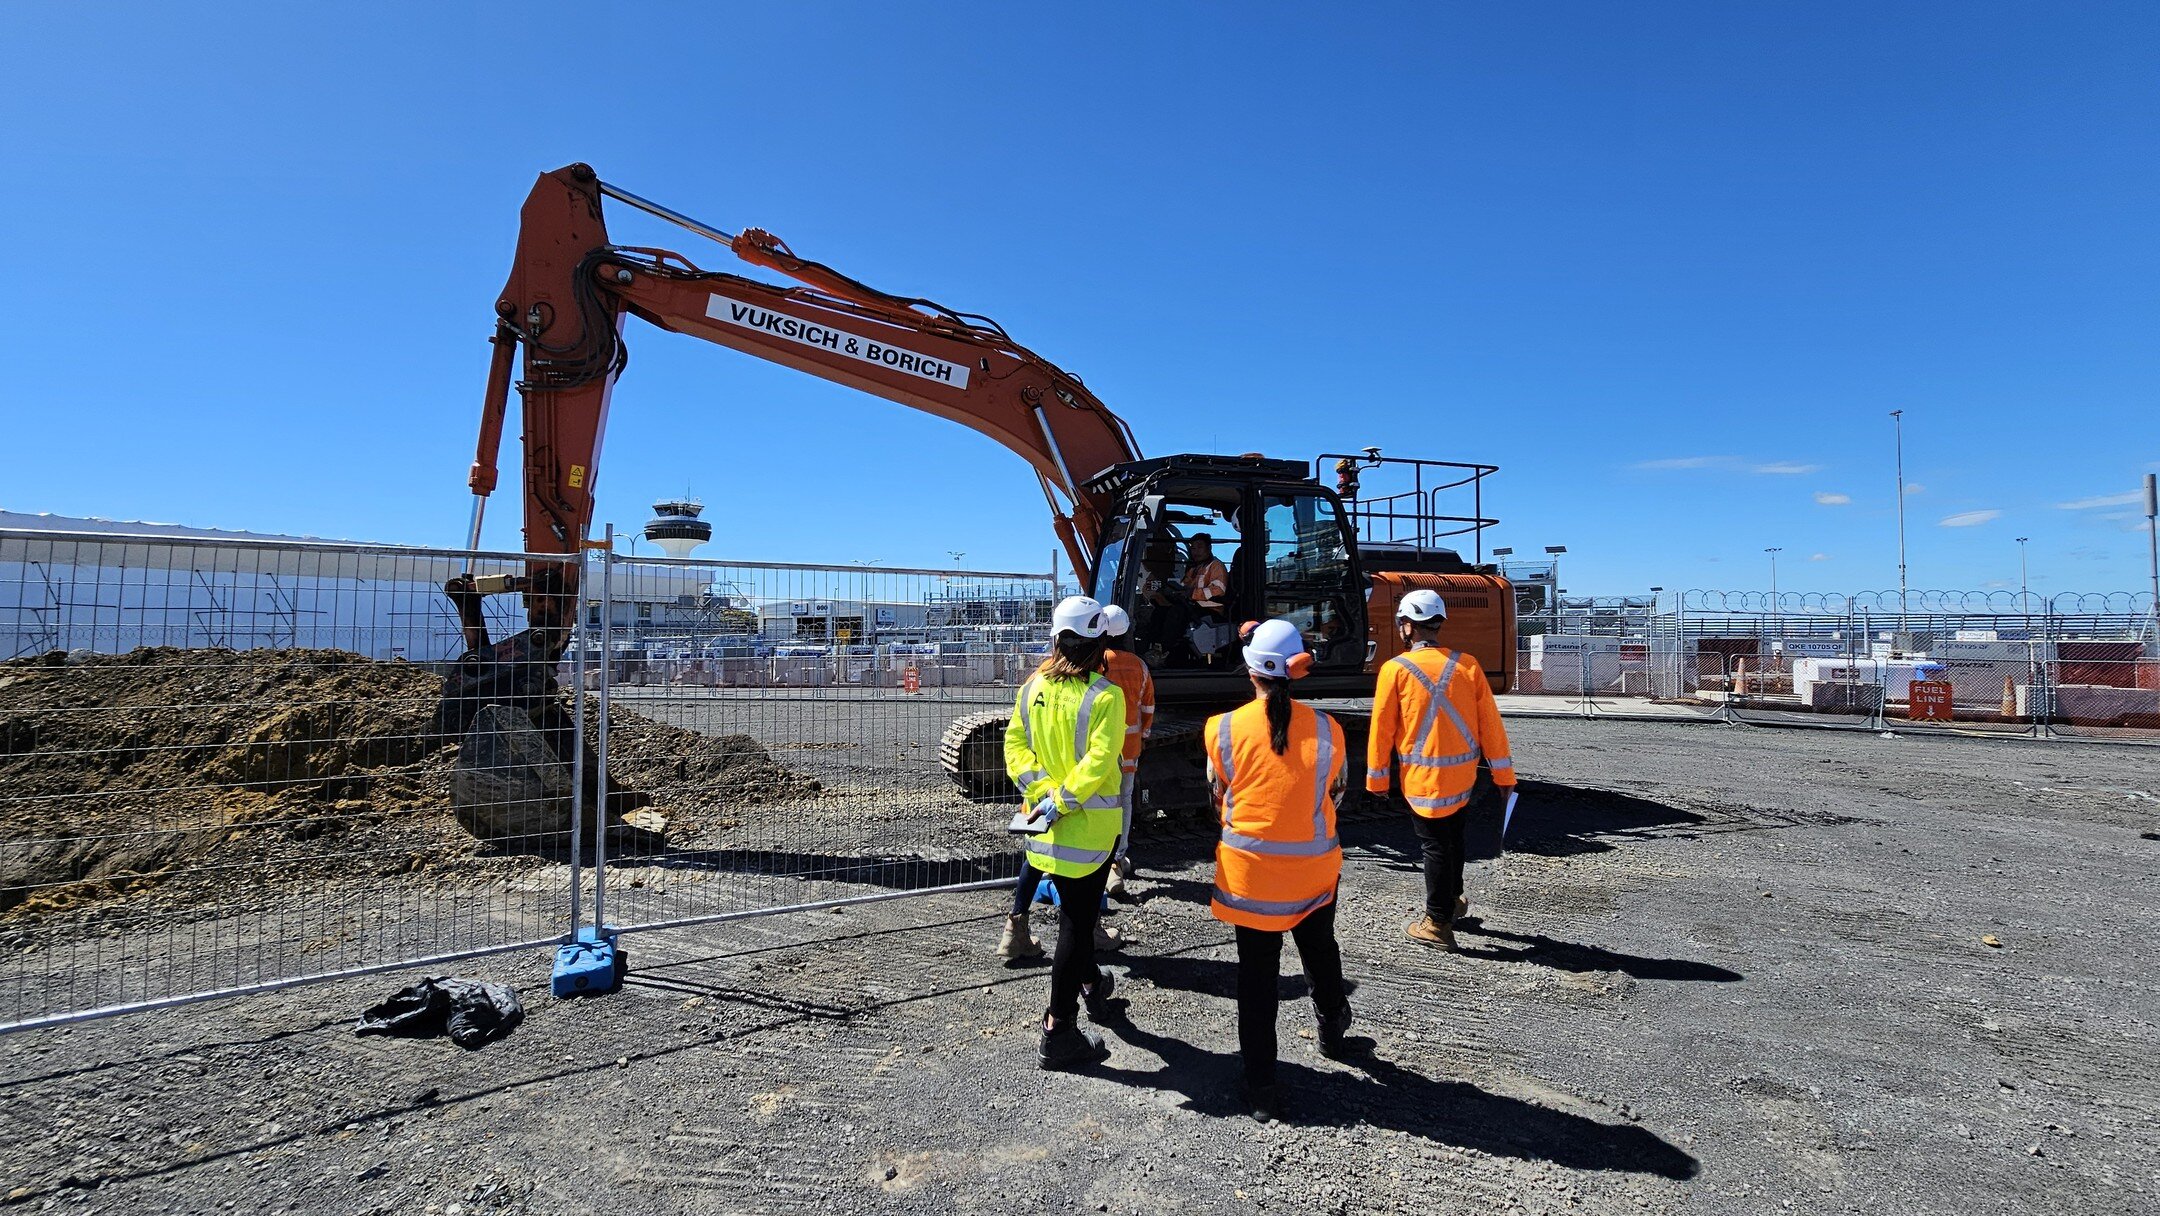 It was a great day in Tamaki Makaurau for another safety walk led by Anntonina, alongside Auckland Airport, Beca and Hawkins on the Domestic Processor Early Works project.

Urban Outcomes Limited, Director Natasha Possenniskie is acting as Engineer t